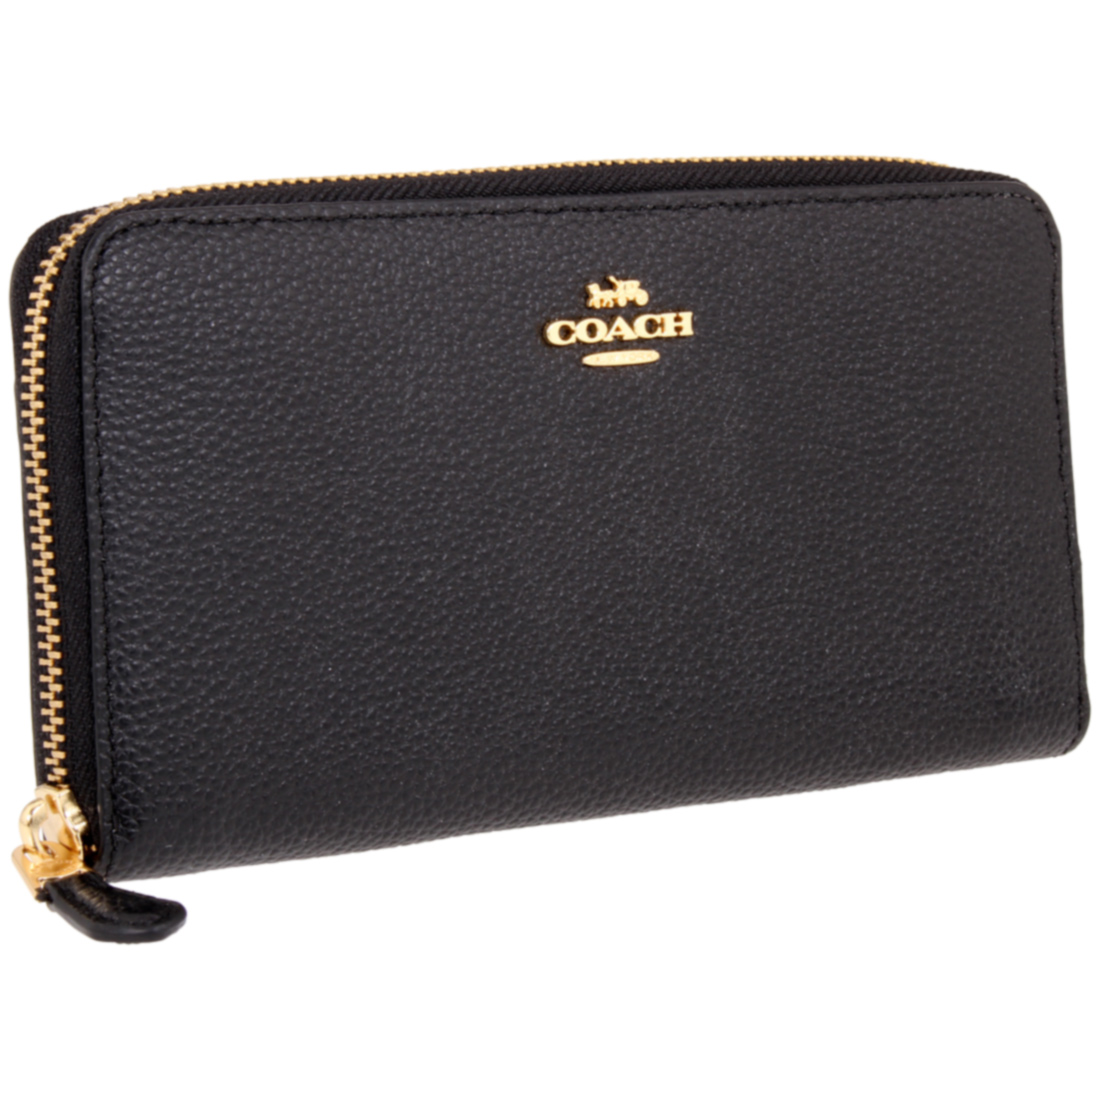 Coach Accordion Ladies Small Black Leather Wallets 58059LIBLK ...